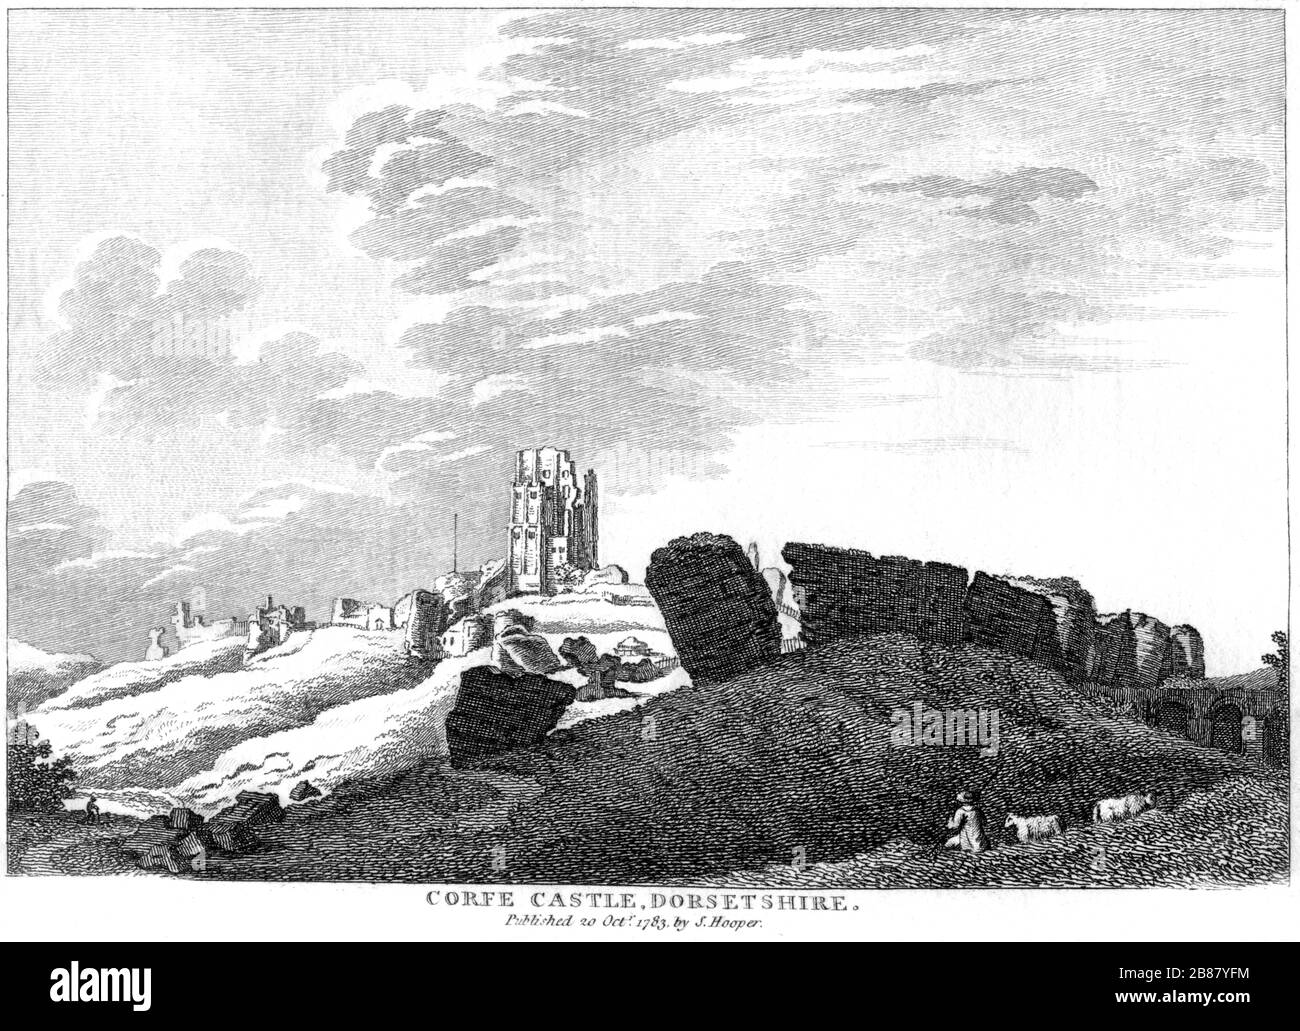 An engraving of Corfe Castle, Dorsetshire 1783 scanned at high resolution from a book published around 1786. Believed copyright free. Stock Photo